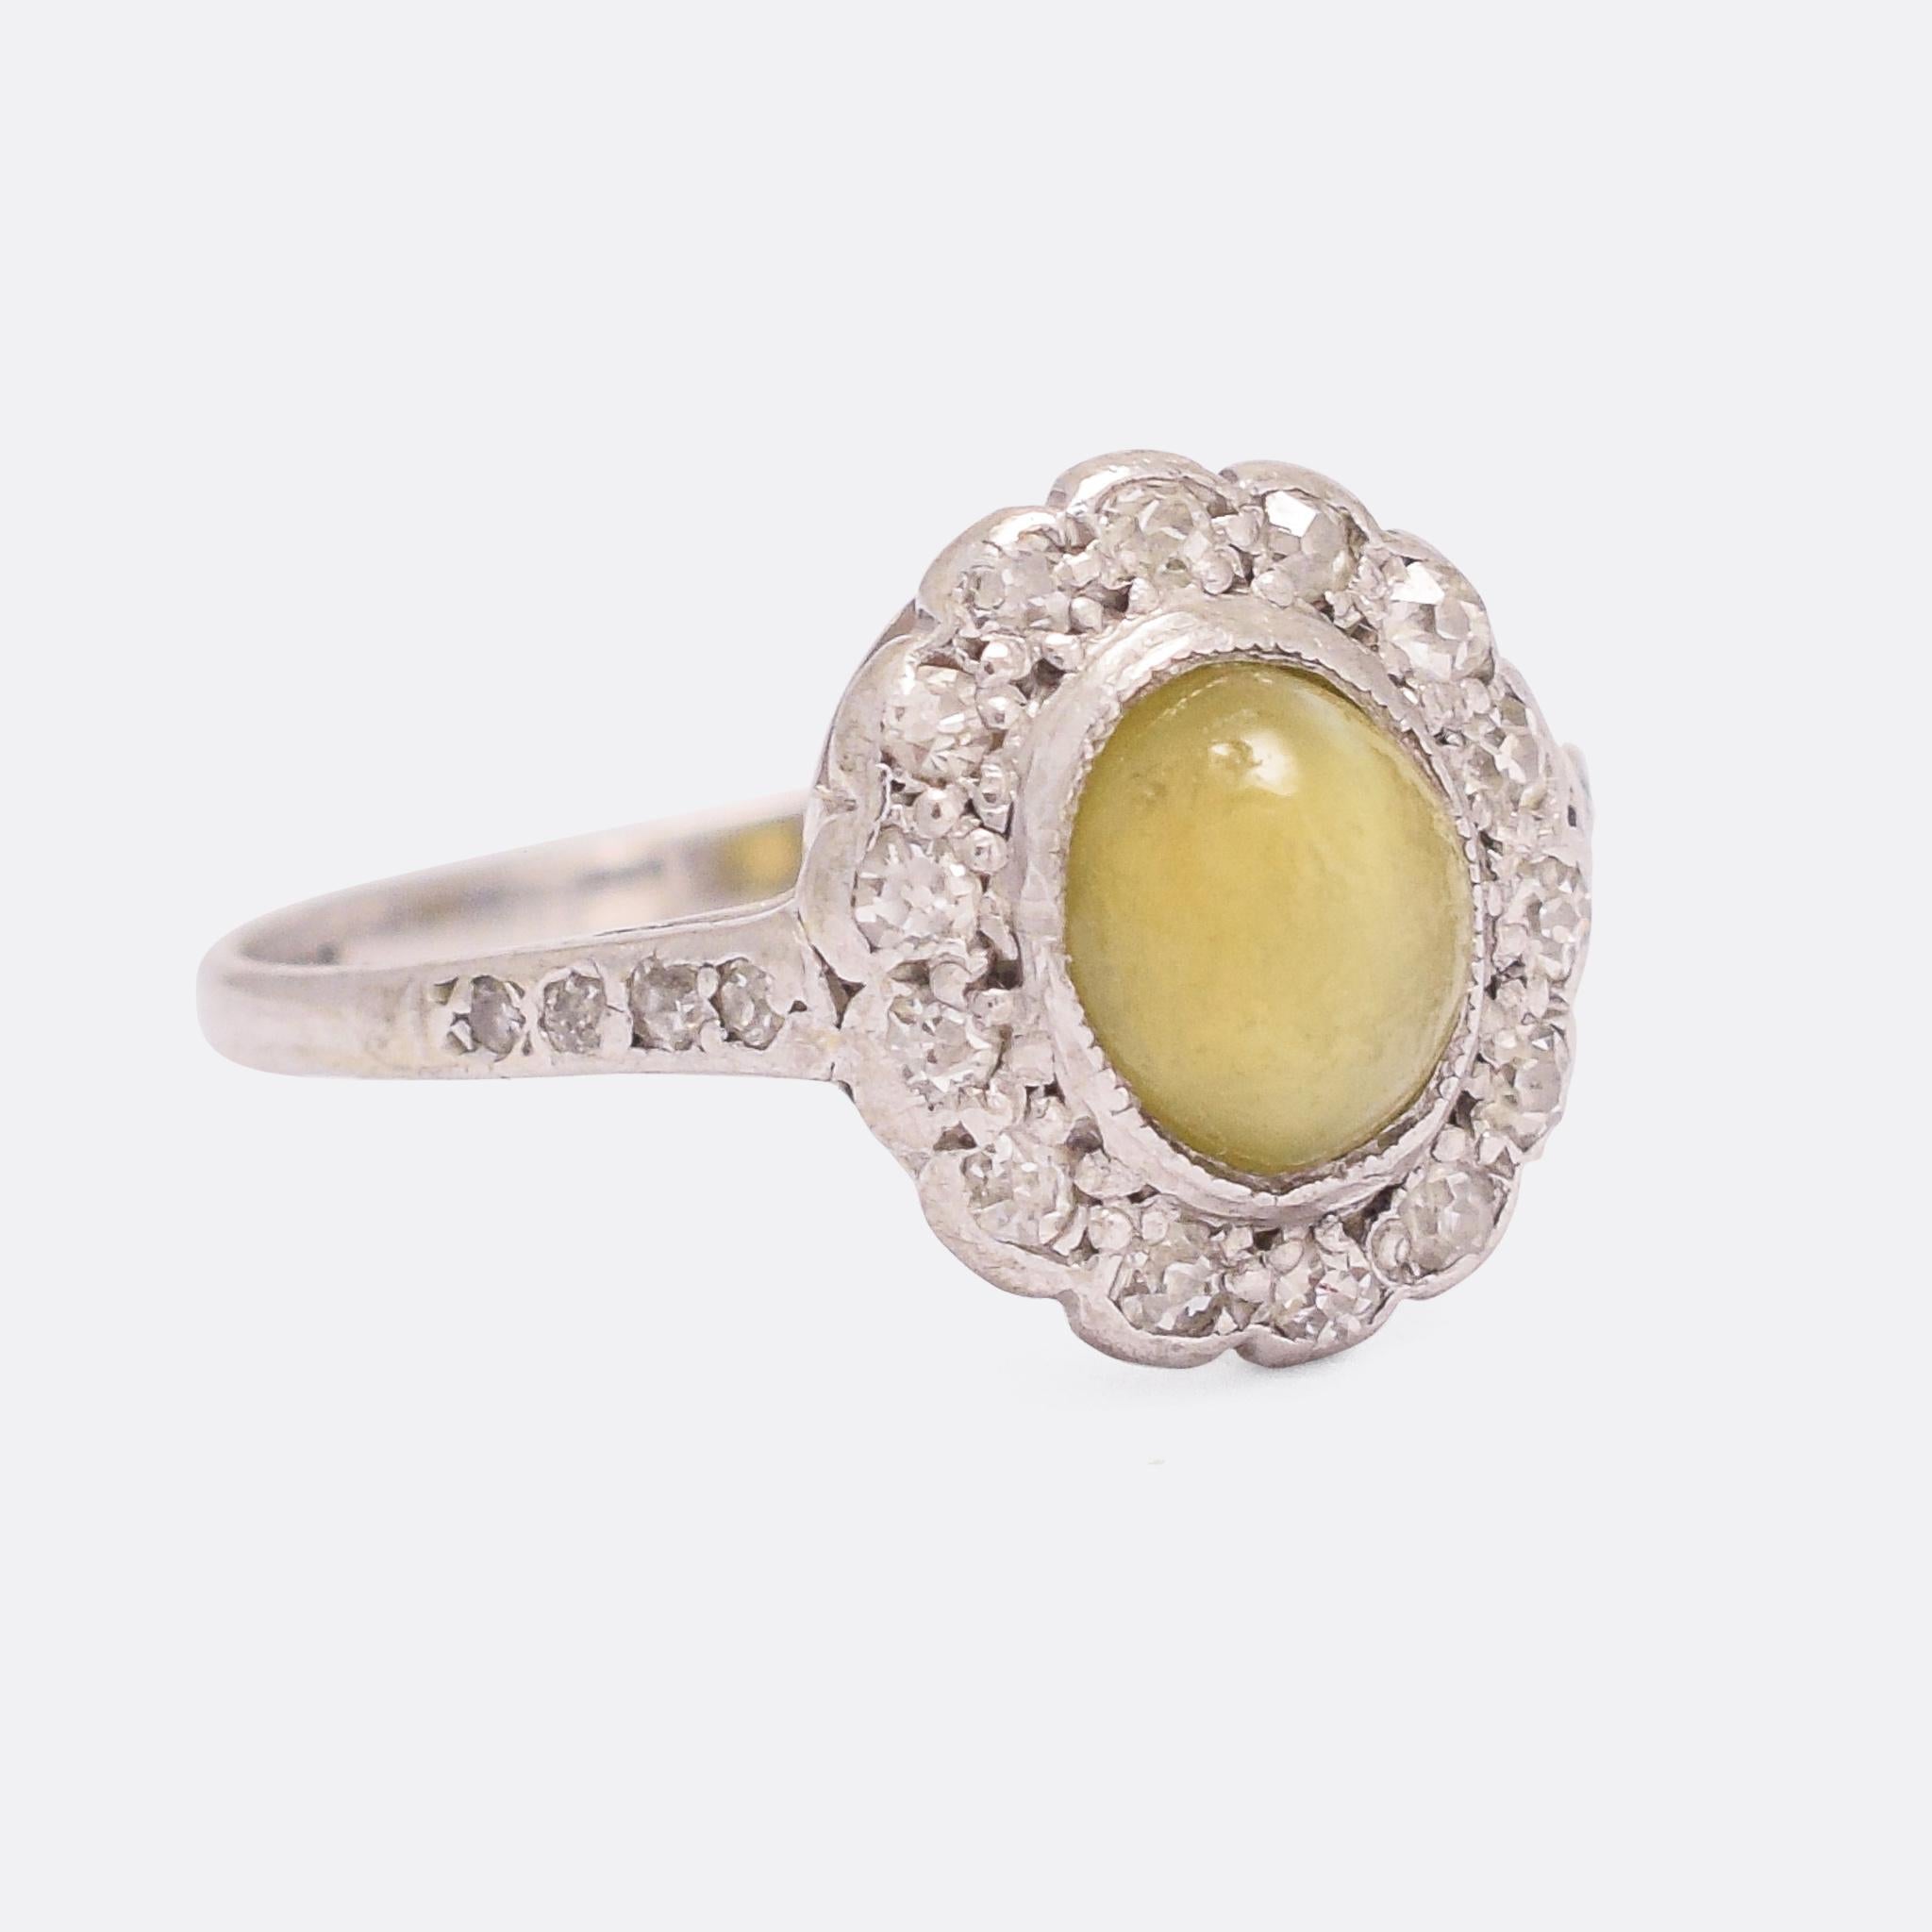 A charming antique cat's eye flower ring dating from the Edwardian era, circa 1910. The principal stone rests in a millegrain bezel setting, surrounded by a halo of white diamonds - each one set into a petal-like mount. The band is worked in 18k